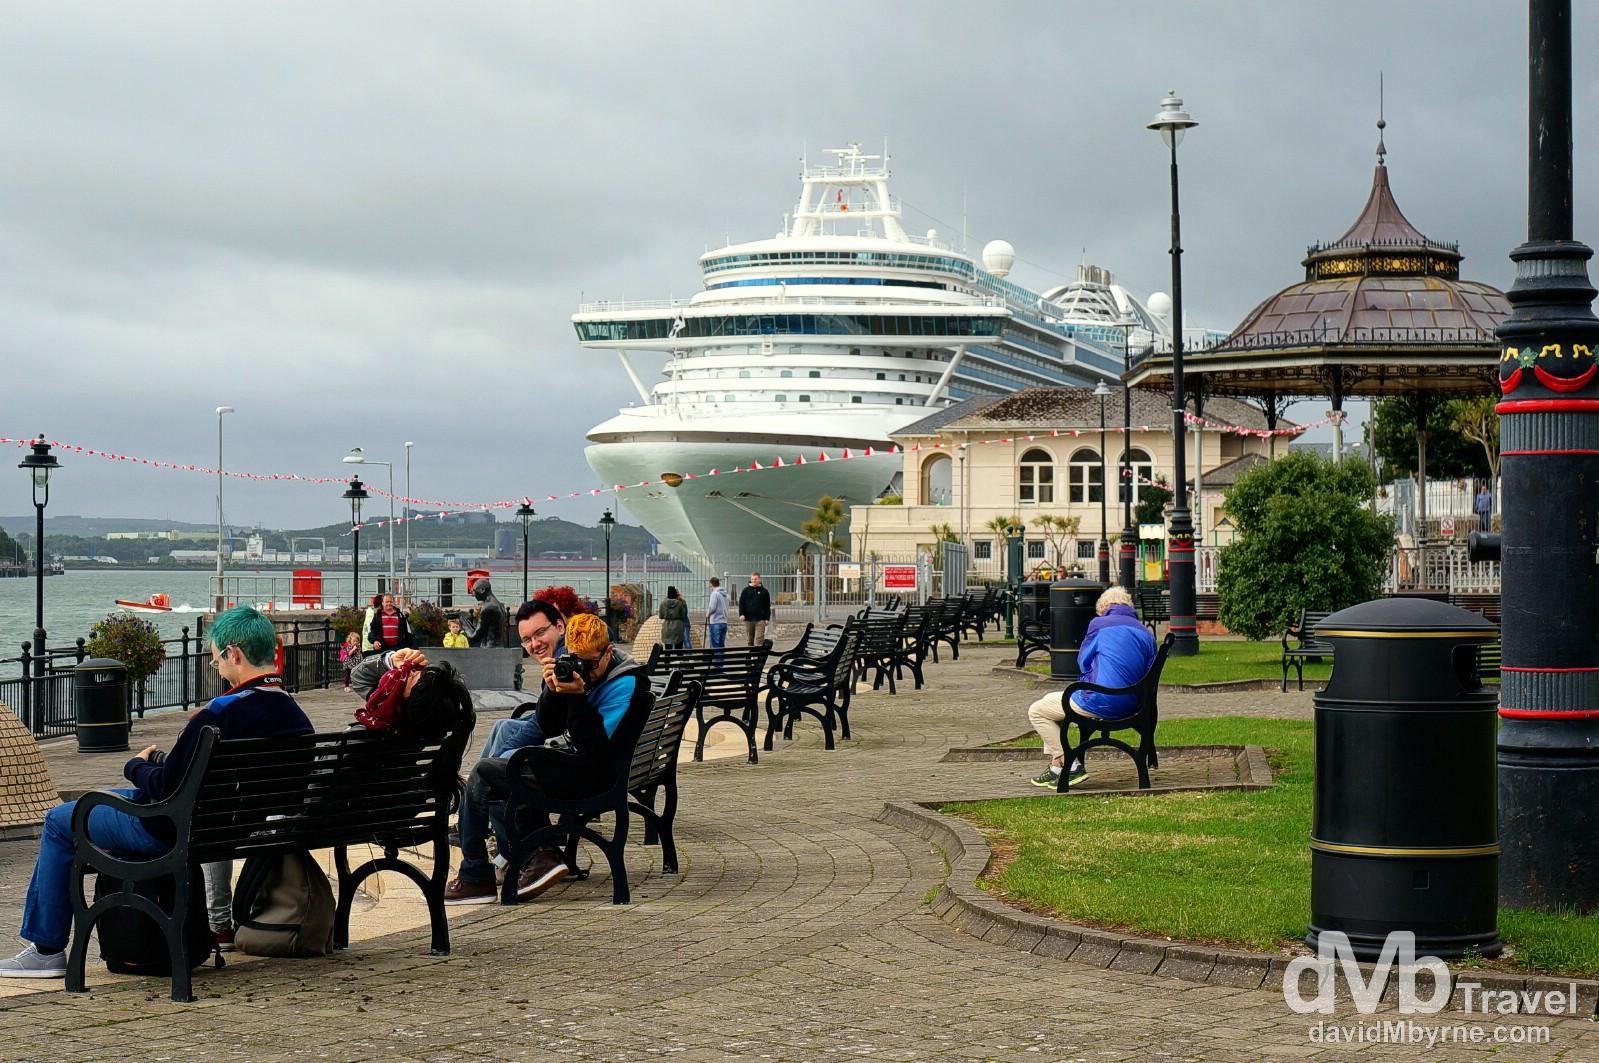 The cruise liner Ruby Princess docked in Cobh, Co. Cork, Ireland. August 29, 2014.